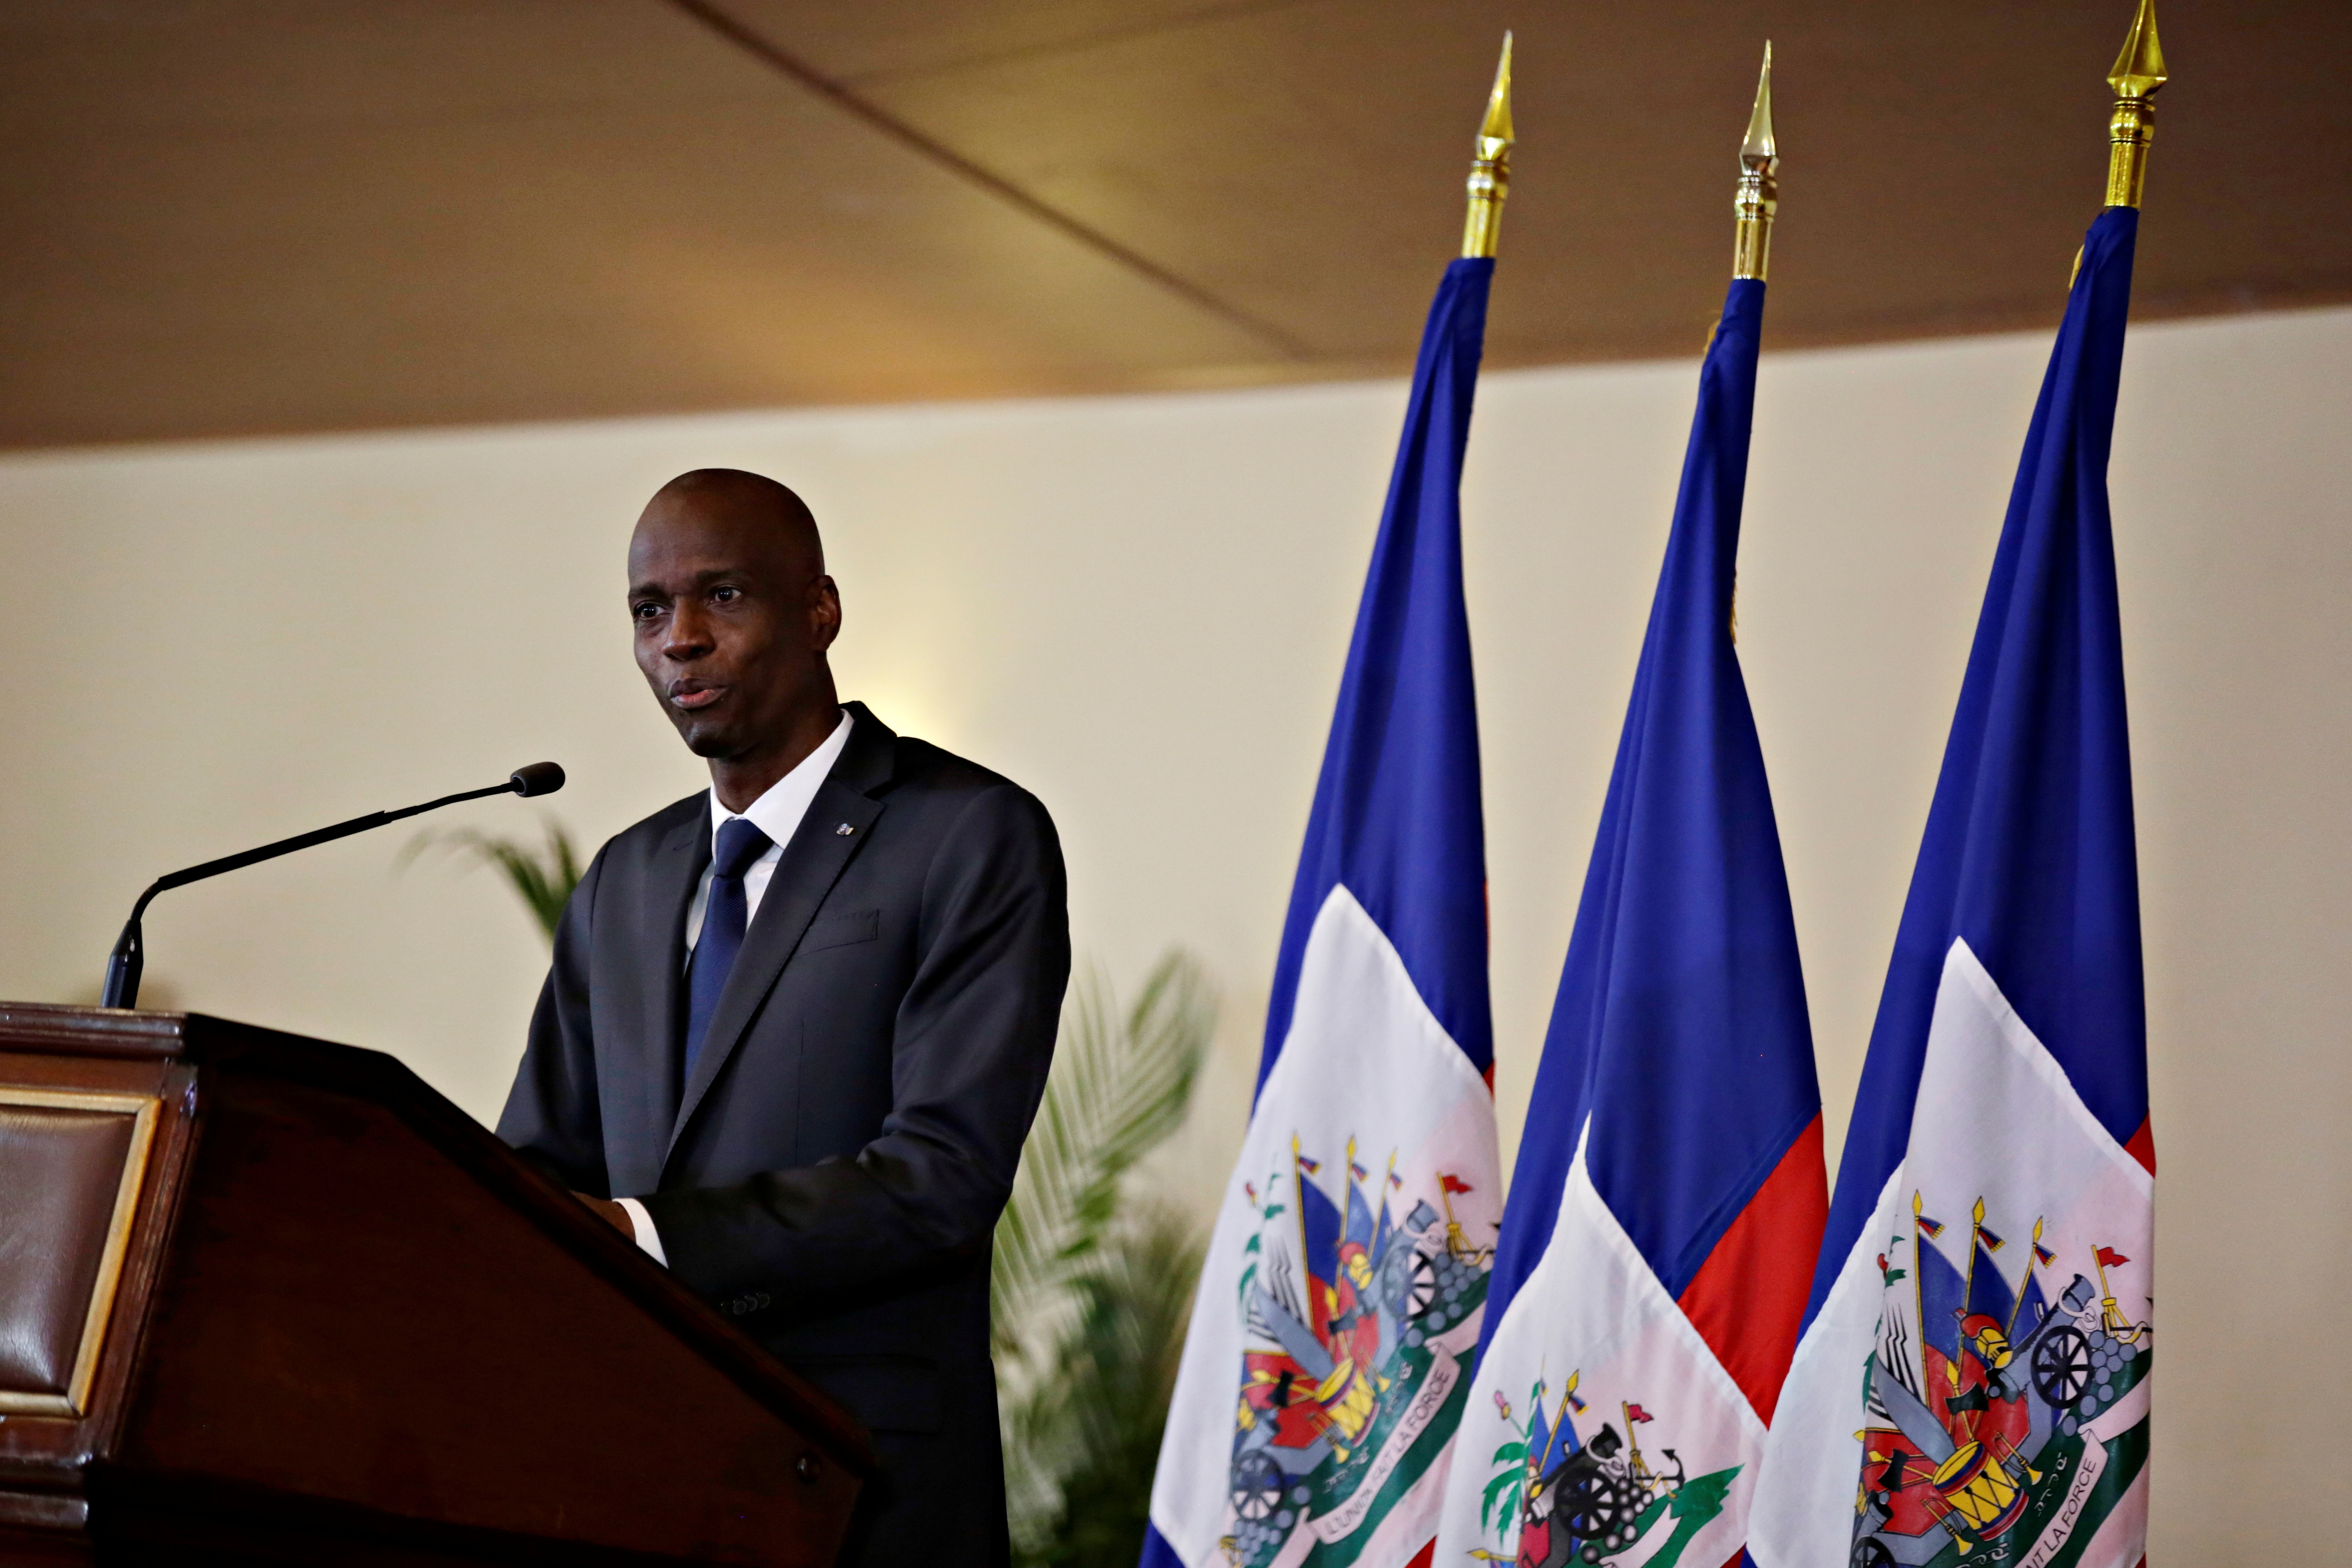 Haiti's President Jovenel Moise speaks during the investiture ceremony of the independent advisory committee for the drafting of the new constitution at the National Palace in Port-au-Prince, Haiti October 30, 2020. REUTERS/Andres Martinez Casares/